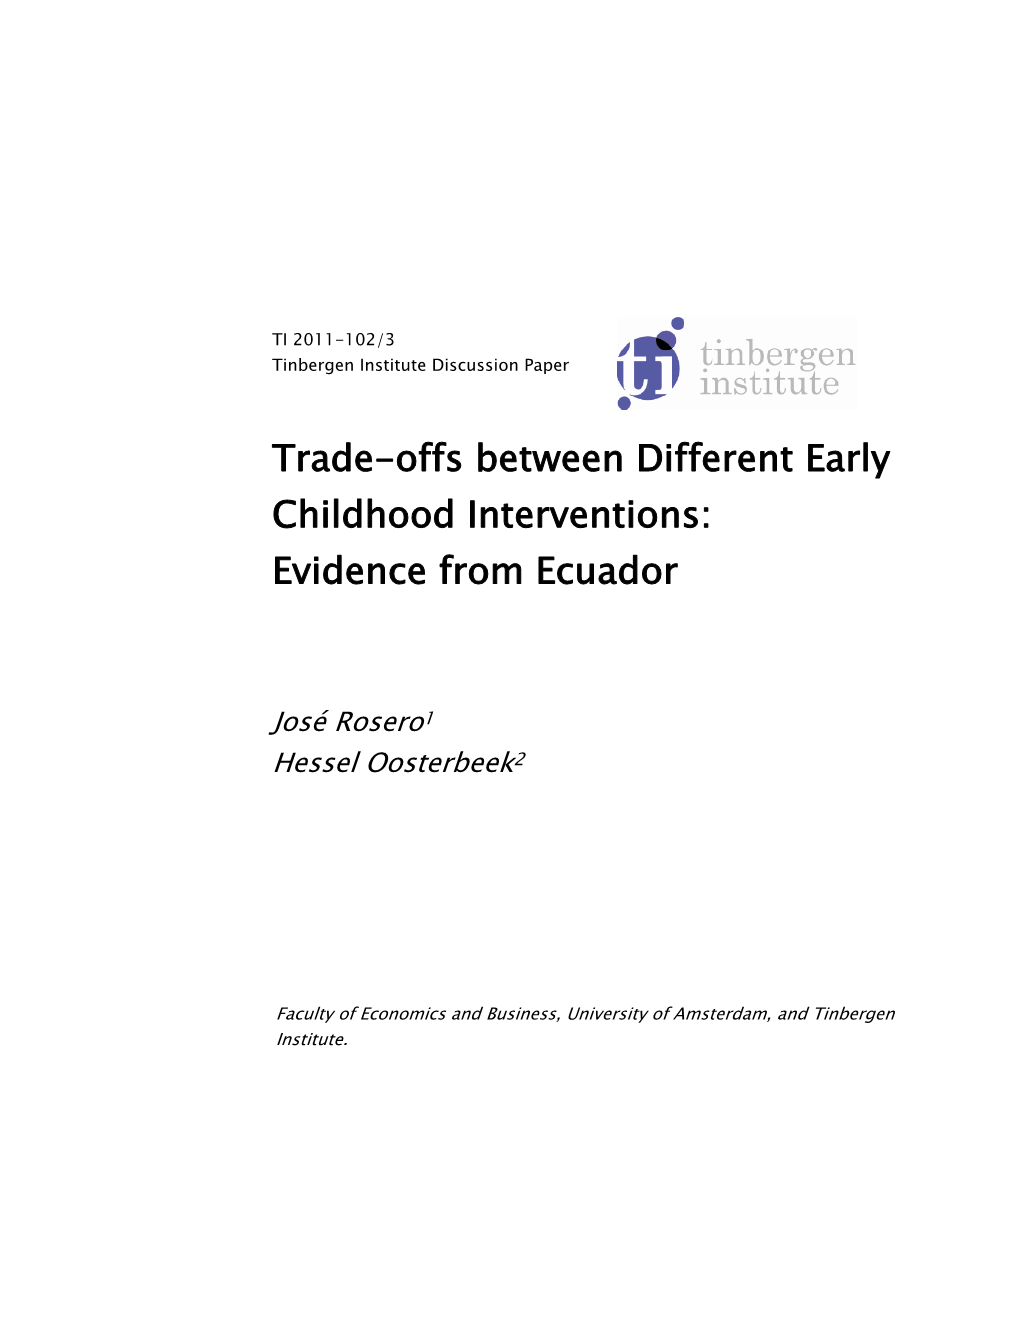 Trade-Offs Between Different Early Childhood Interventions: Evidence from Ecuador